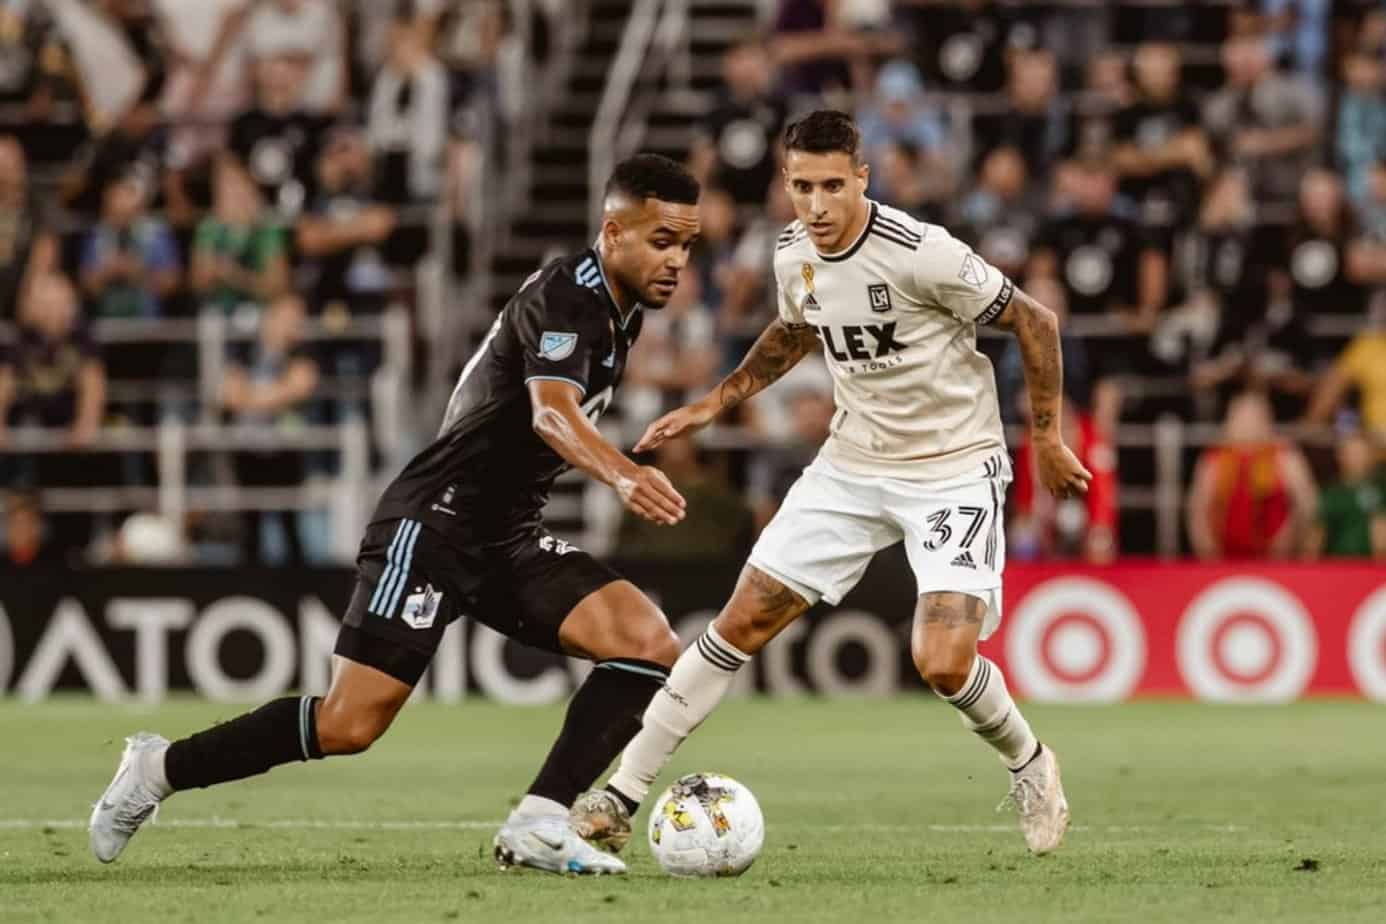 Minnesota United vs. LAFC Preview and Betting Odds